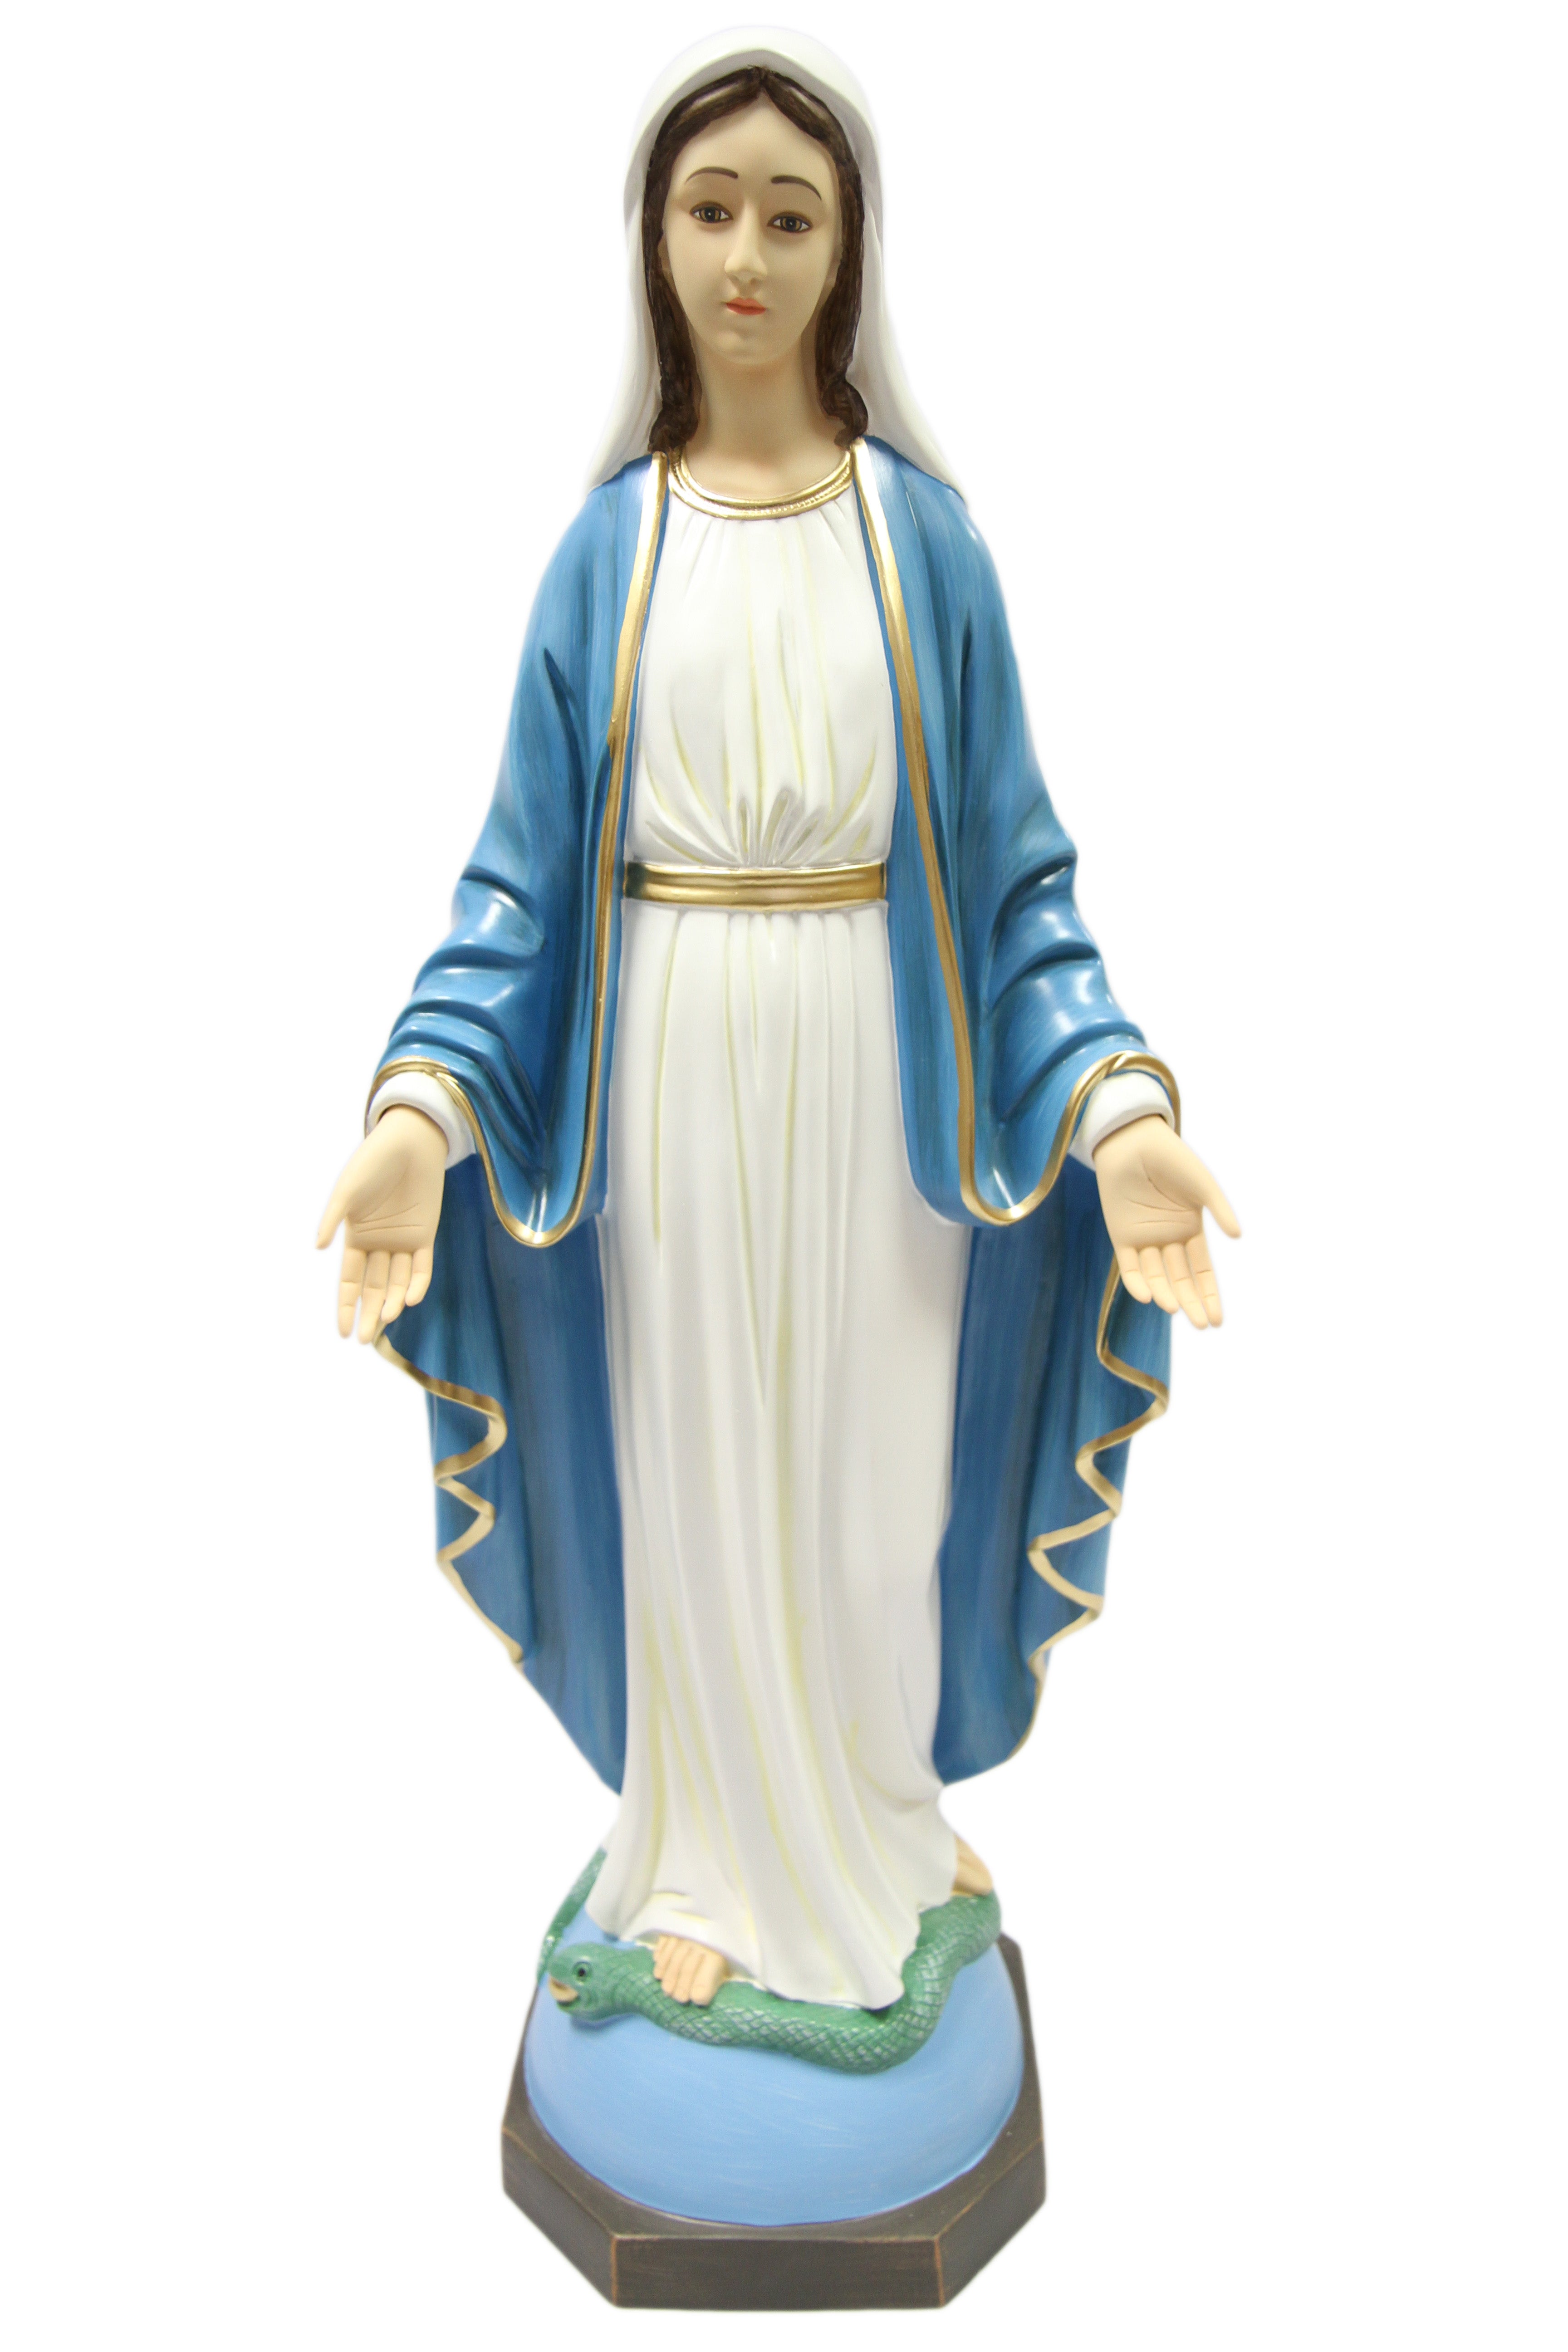 31 Inch Our Lady of Grace Virgin Mary Catholic Statue Sculpture Blessed Mother